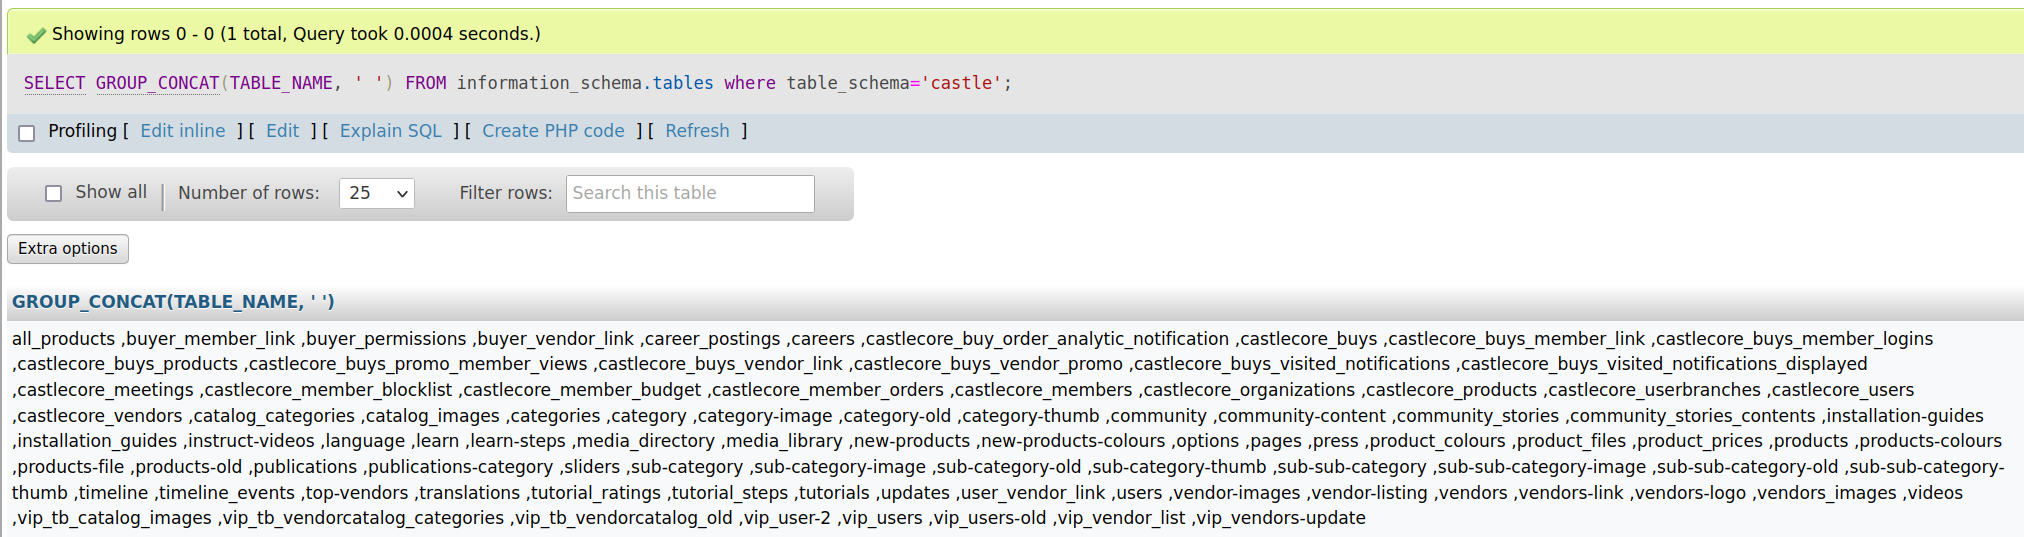 A screenshot of the existing database coluumns